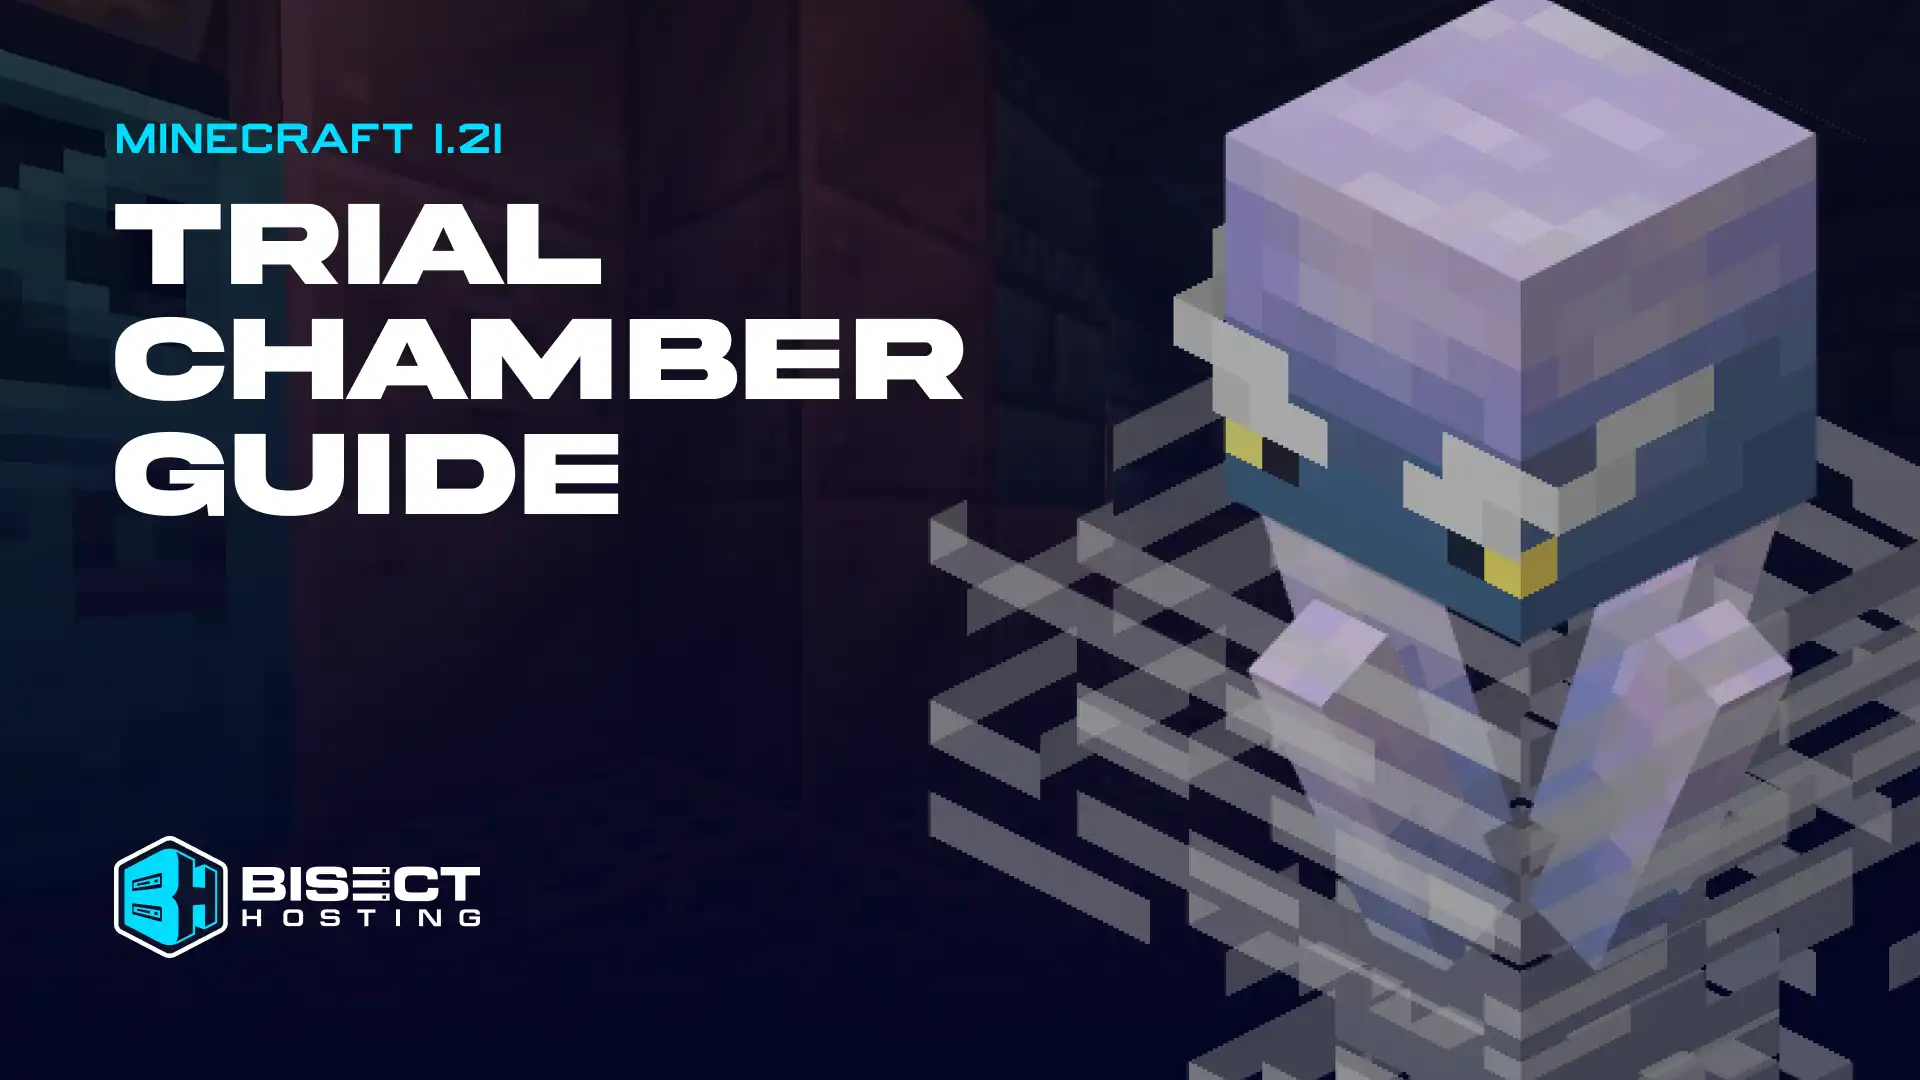 Minecraft 1.21 Trial Chamber Guide